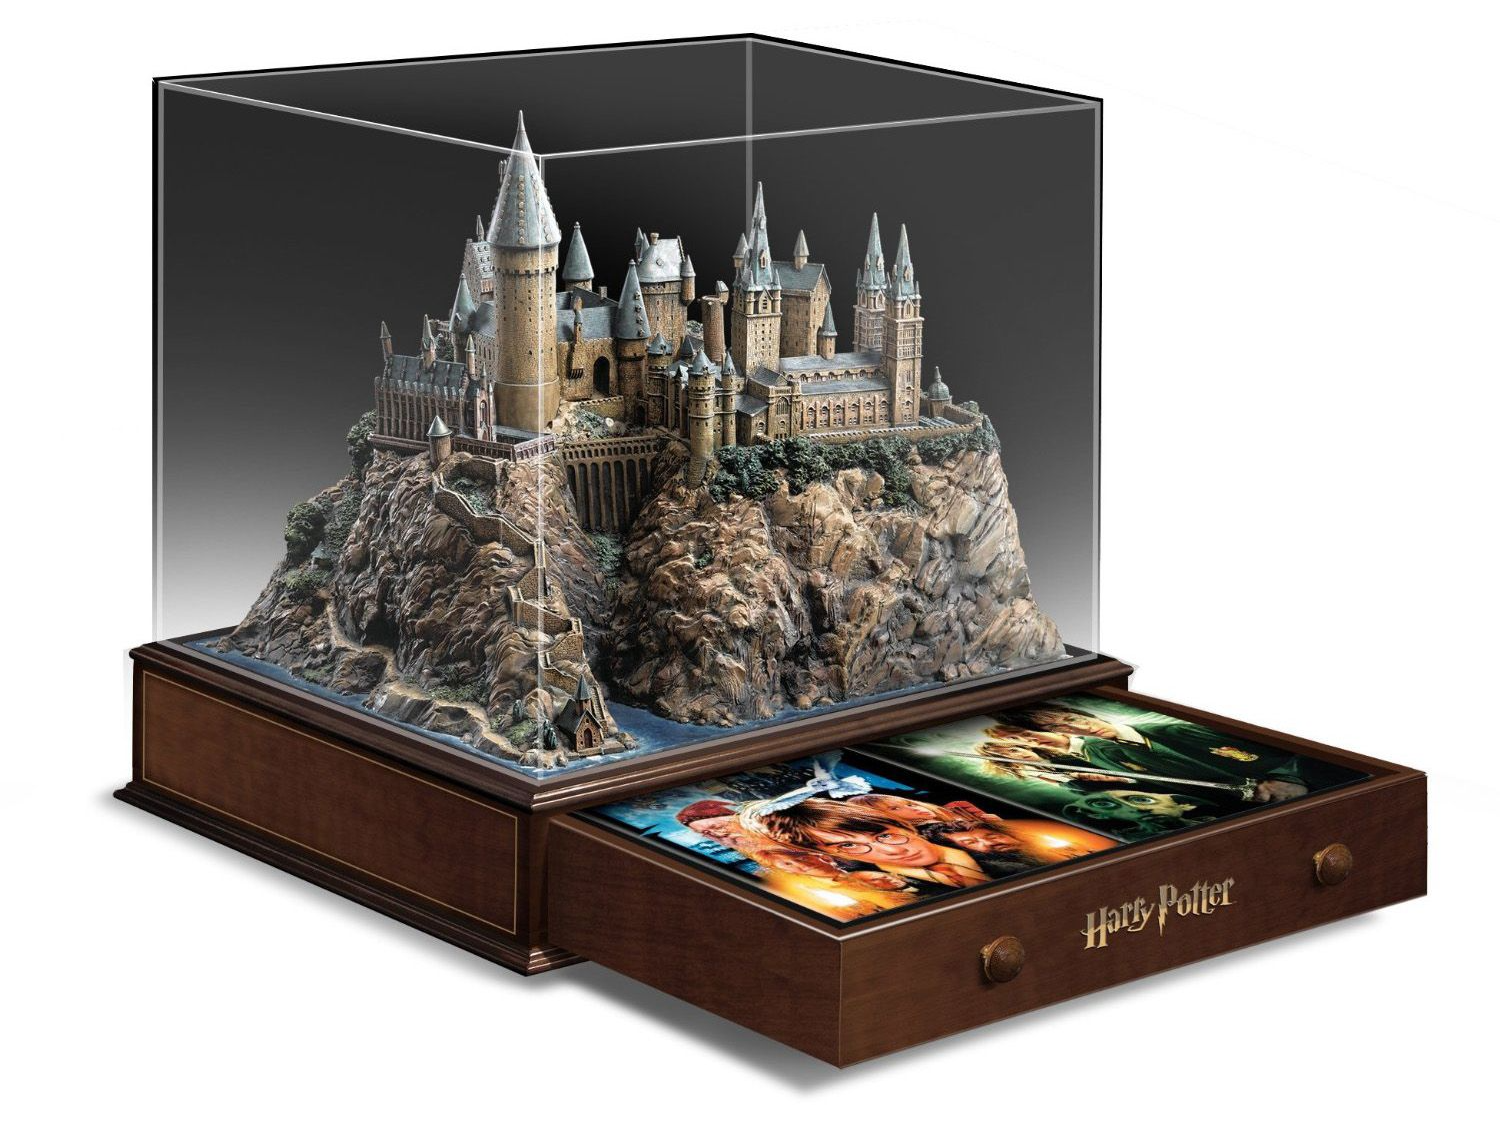 Harry Potter: Years 1-6 Gift Set Blu-ray (Harry Potter and  the  Sorcerer's Stone / the Chamber of Secrets / the Prisoner of Azkaban / the  Goblet of Fire / the Order